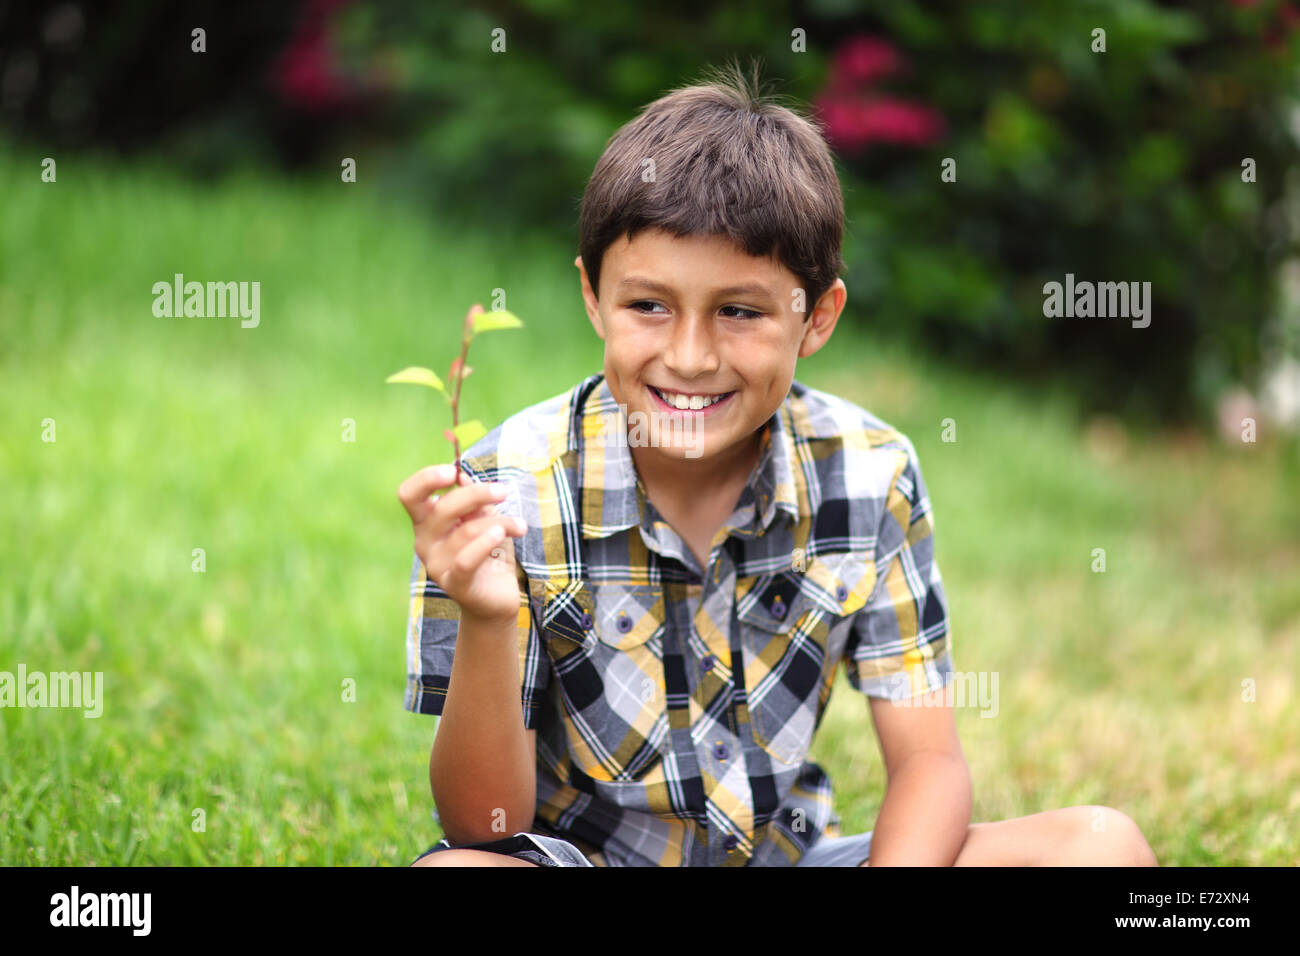 A young boy smiles as he looks at a flowering plant Stock Photo